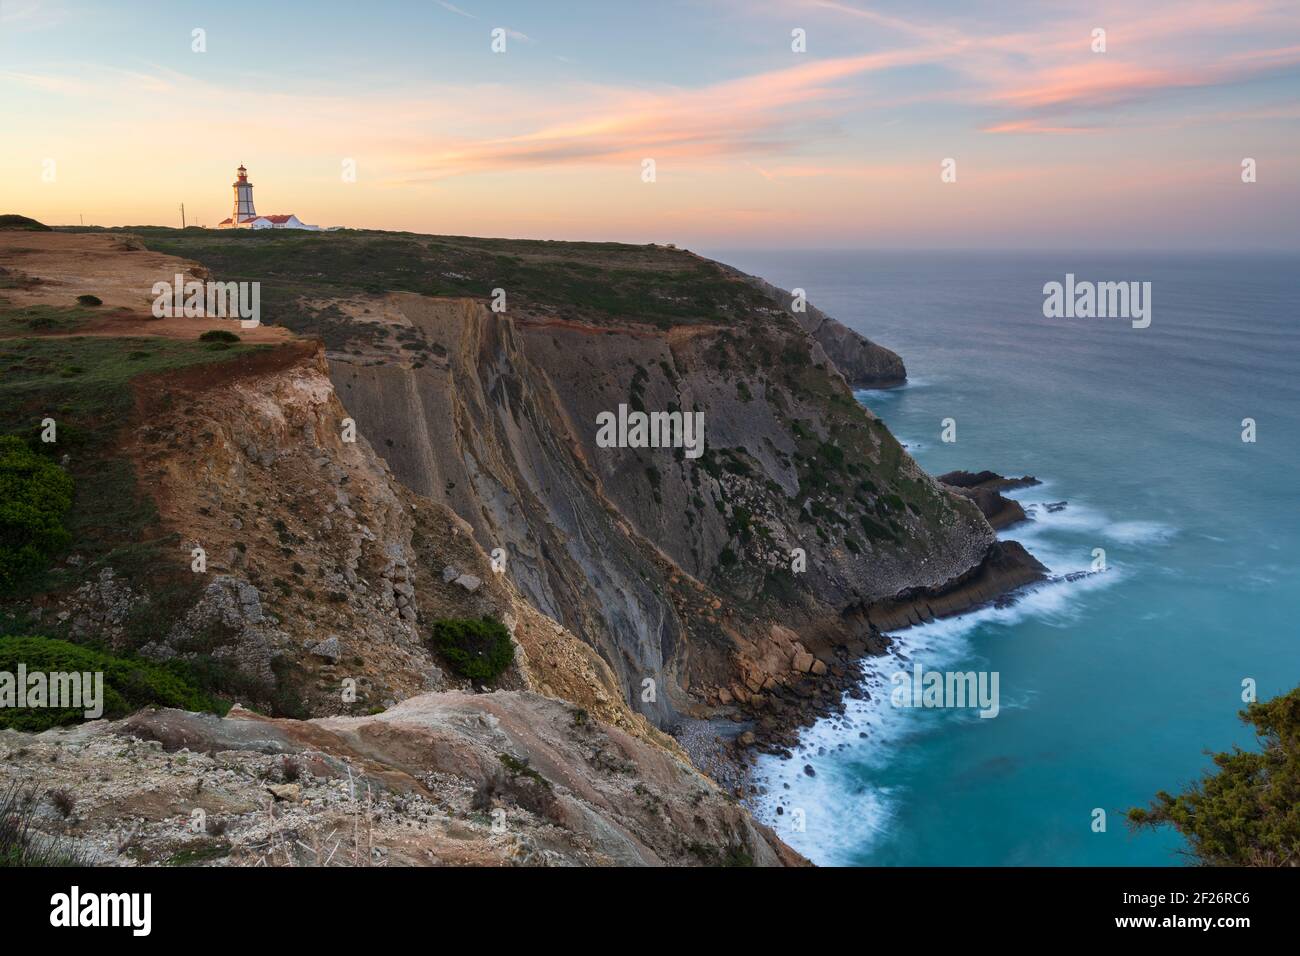 Cabo Espichel cape at sunset with sea cliffs and atlantic ocean landscape, in Portugal Stock Photo